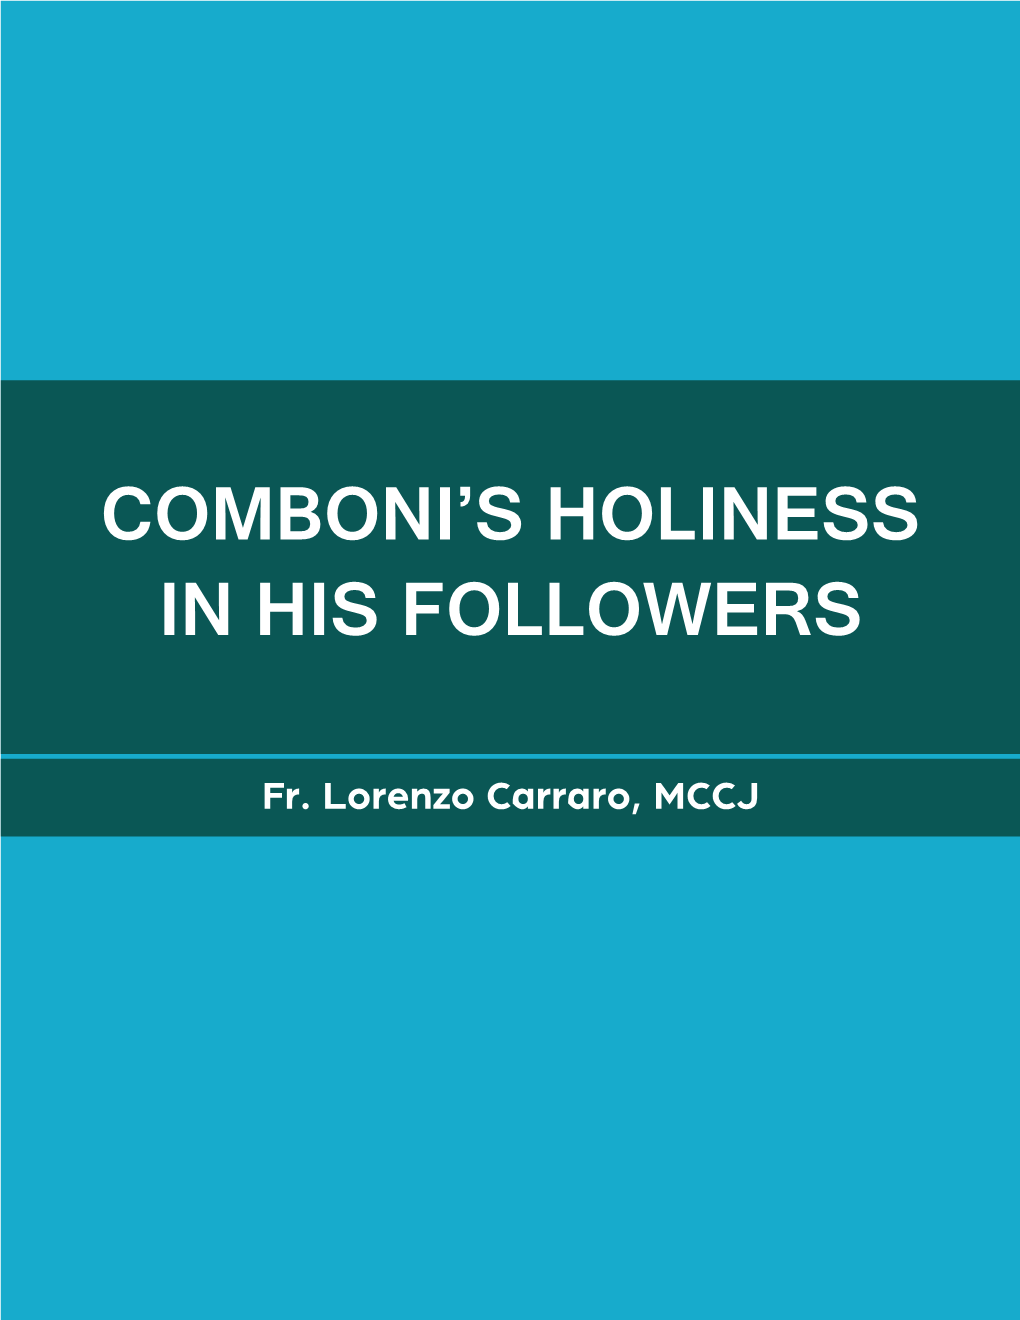 Comboni's Holiness in His Followers